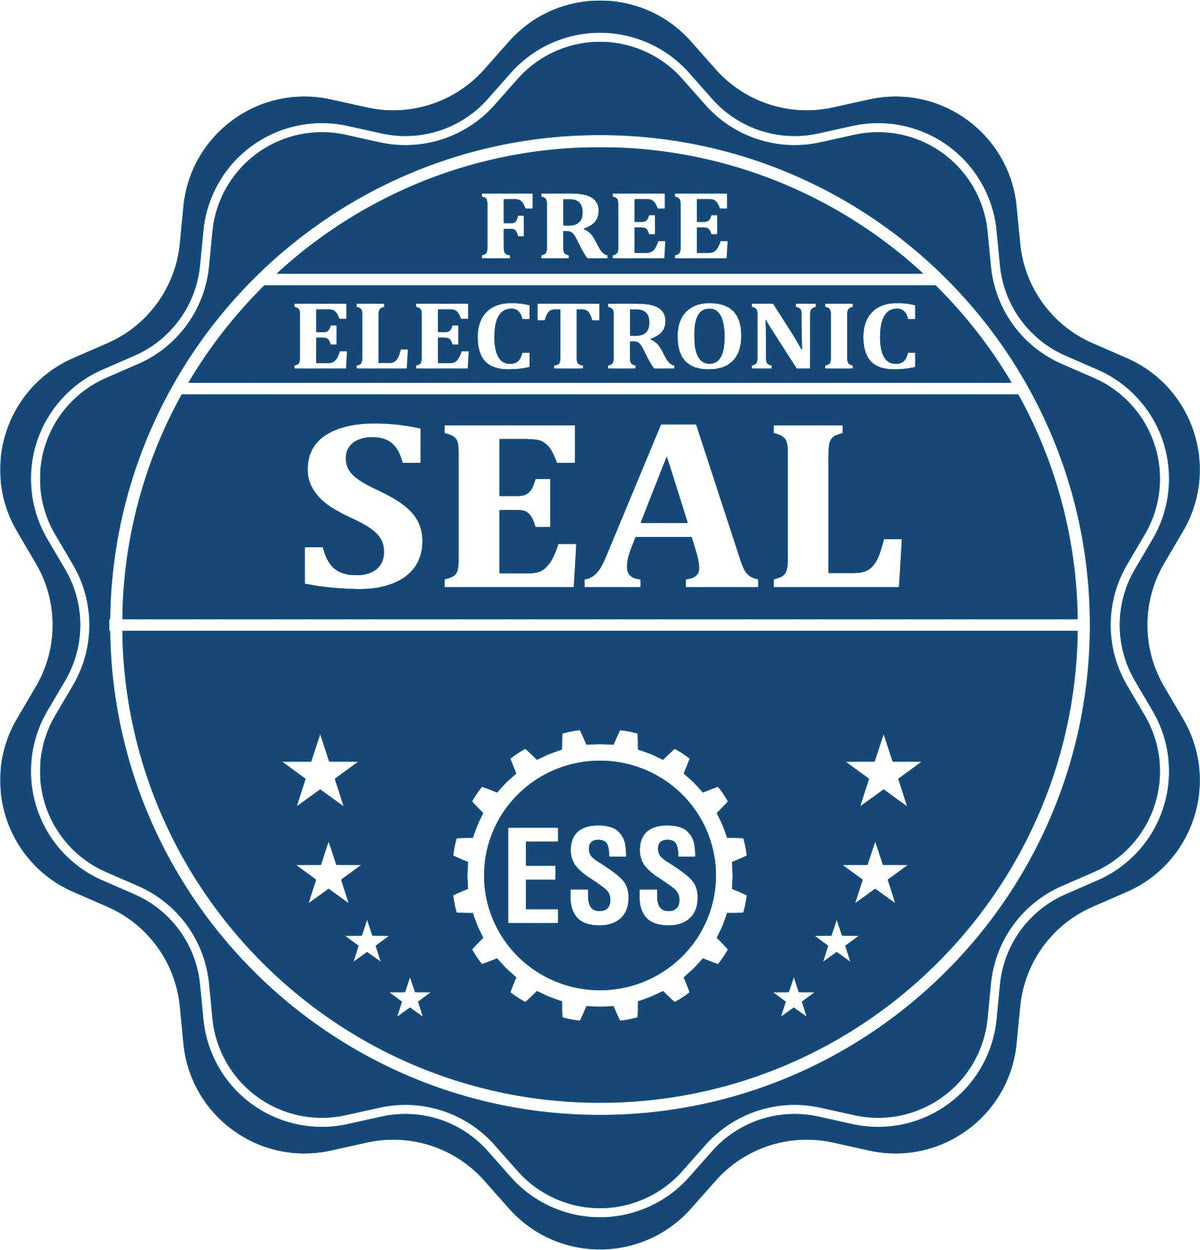 A badge showing a free electronic seal for the Soft Texas Professional Geologist Seal with stars and the ESS gear on the emblem.